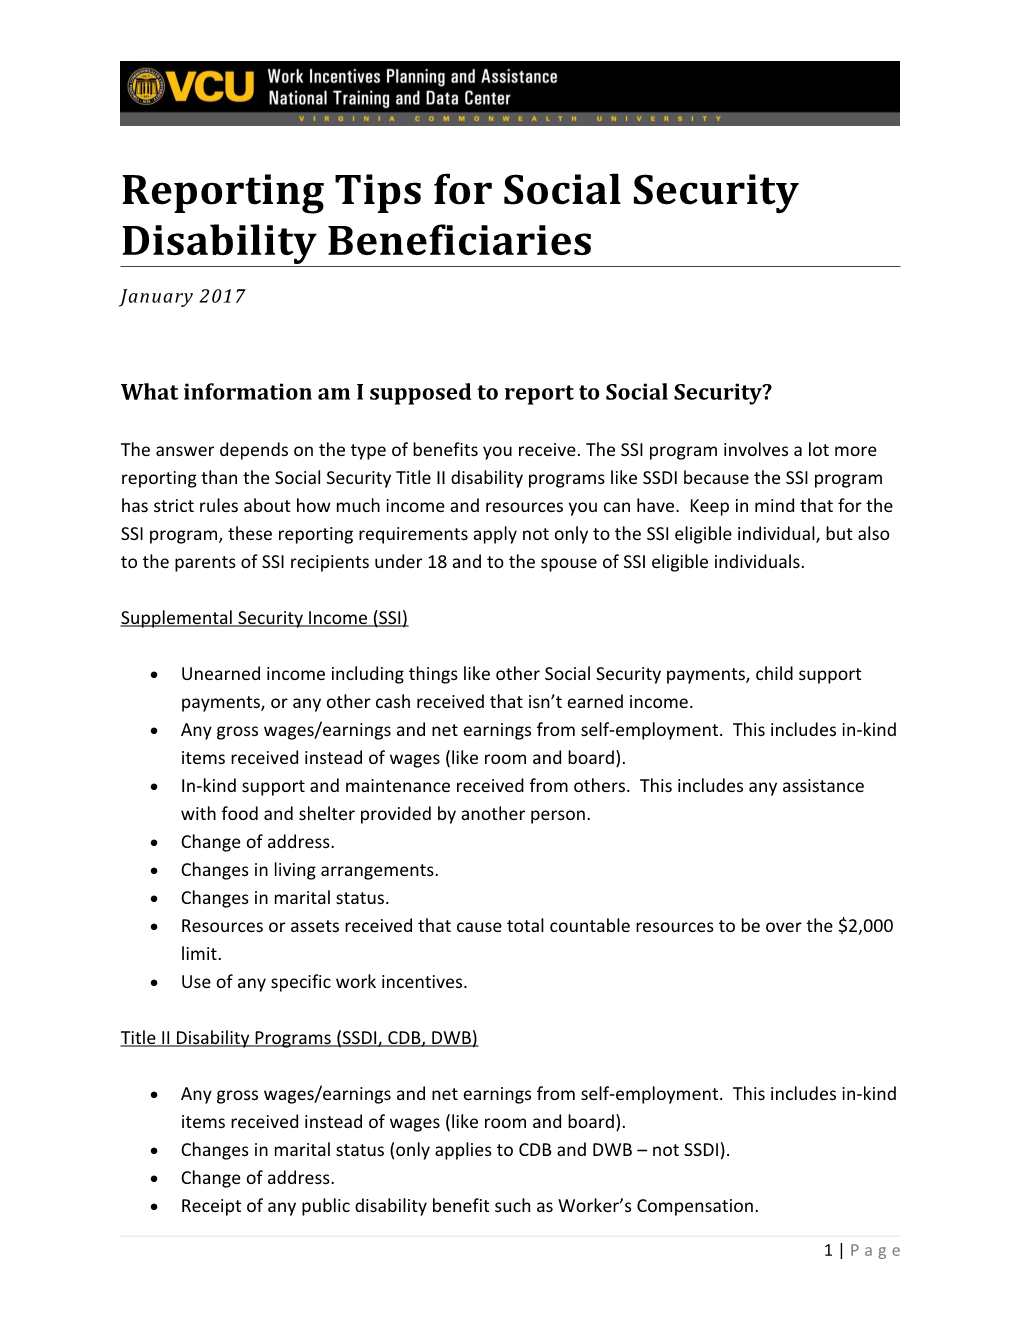 Reporting Tips for Social Security Disability Beneficiaries